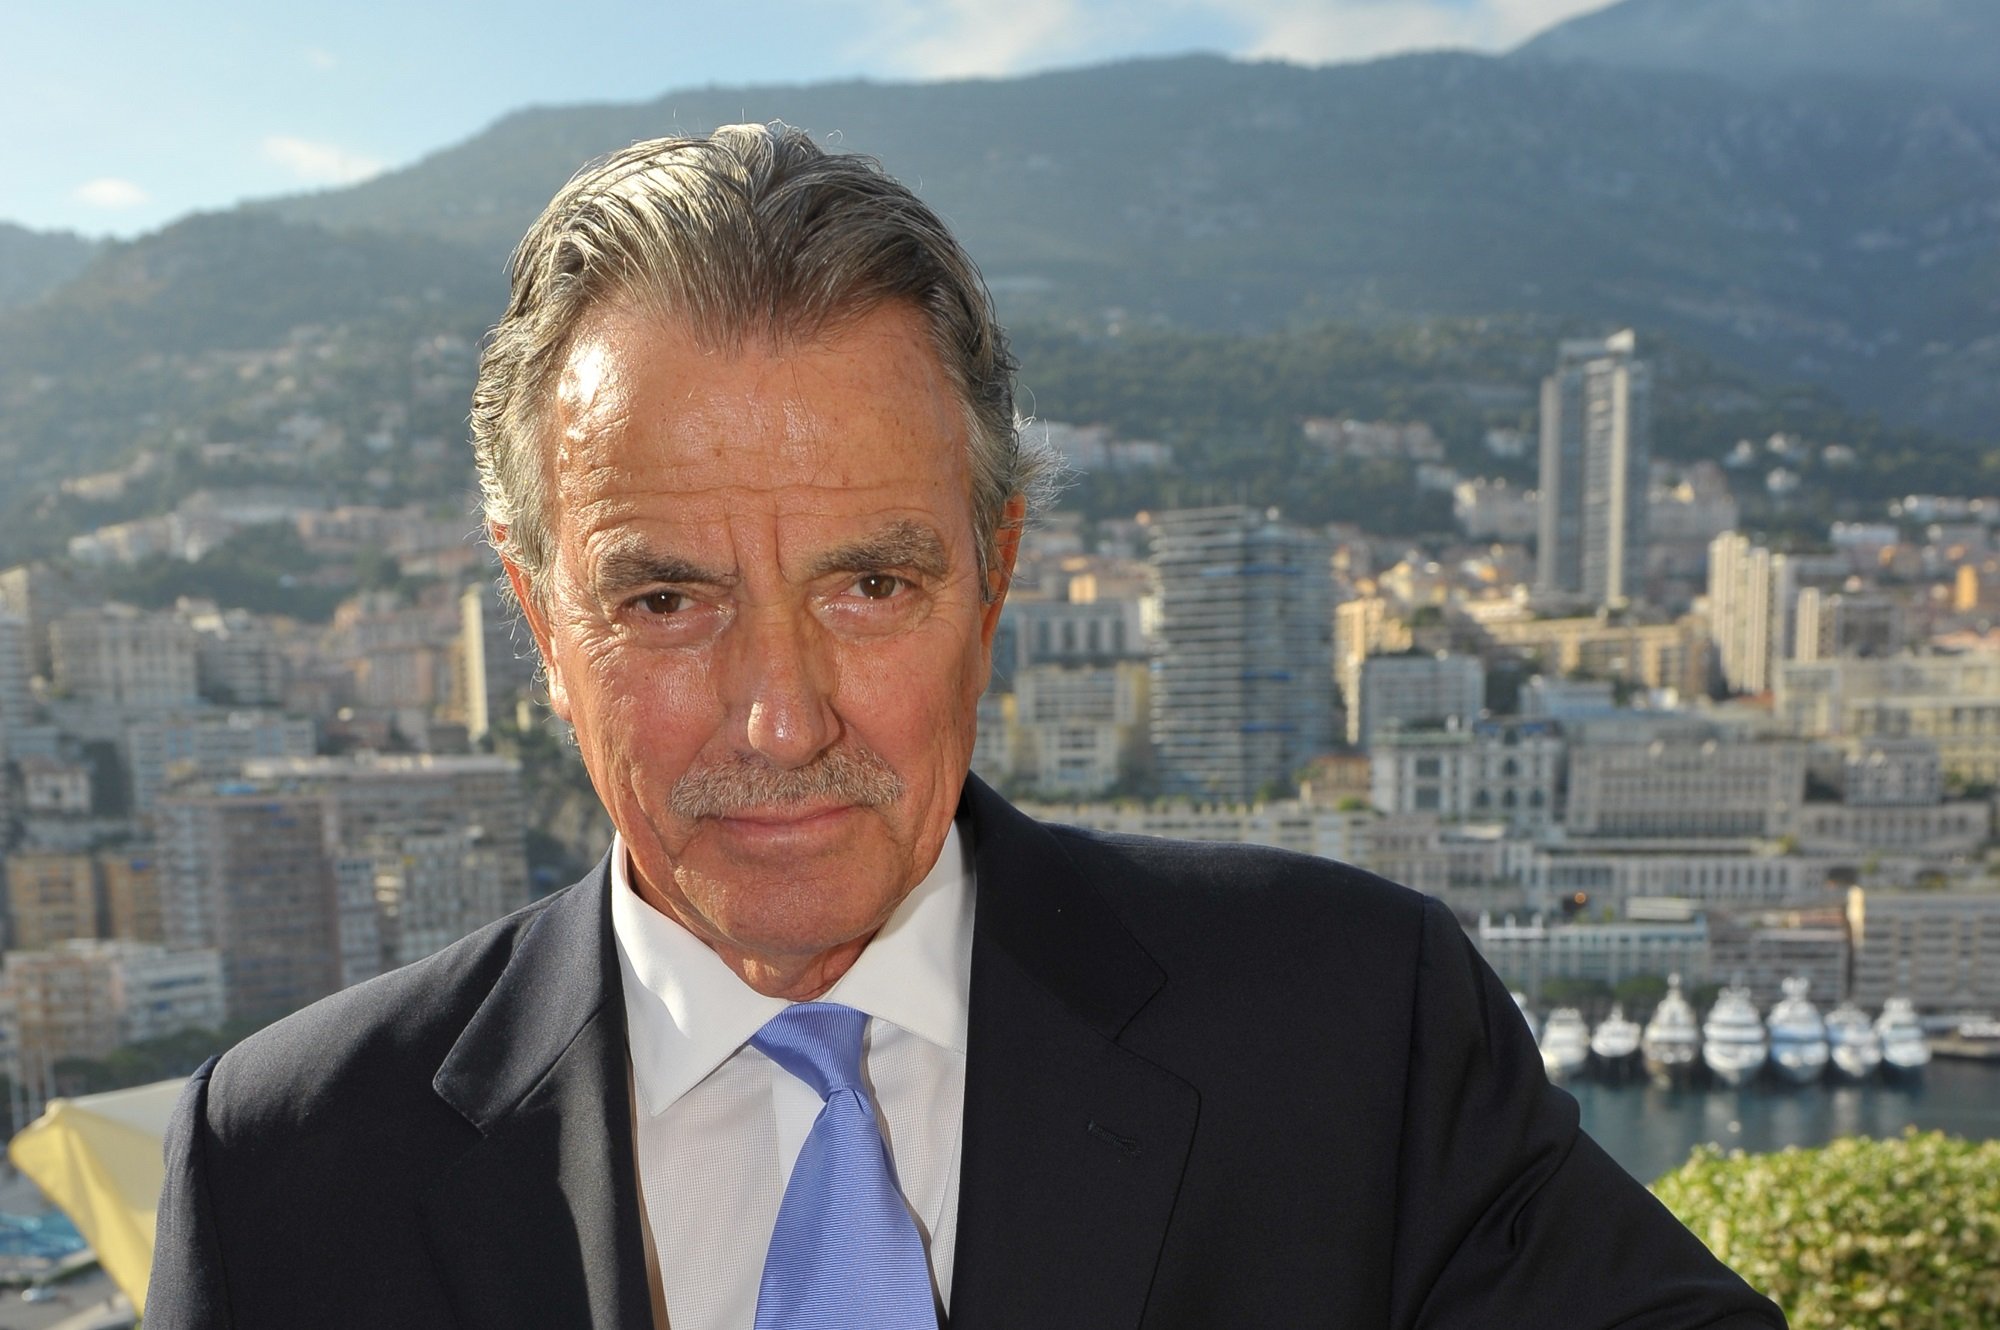 The Young and the Restless character of Victor Newman, played by Eric Braeden, pictured here in Monte Carlo in a tailored suit